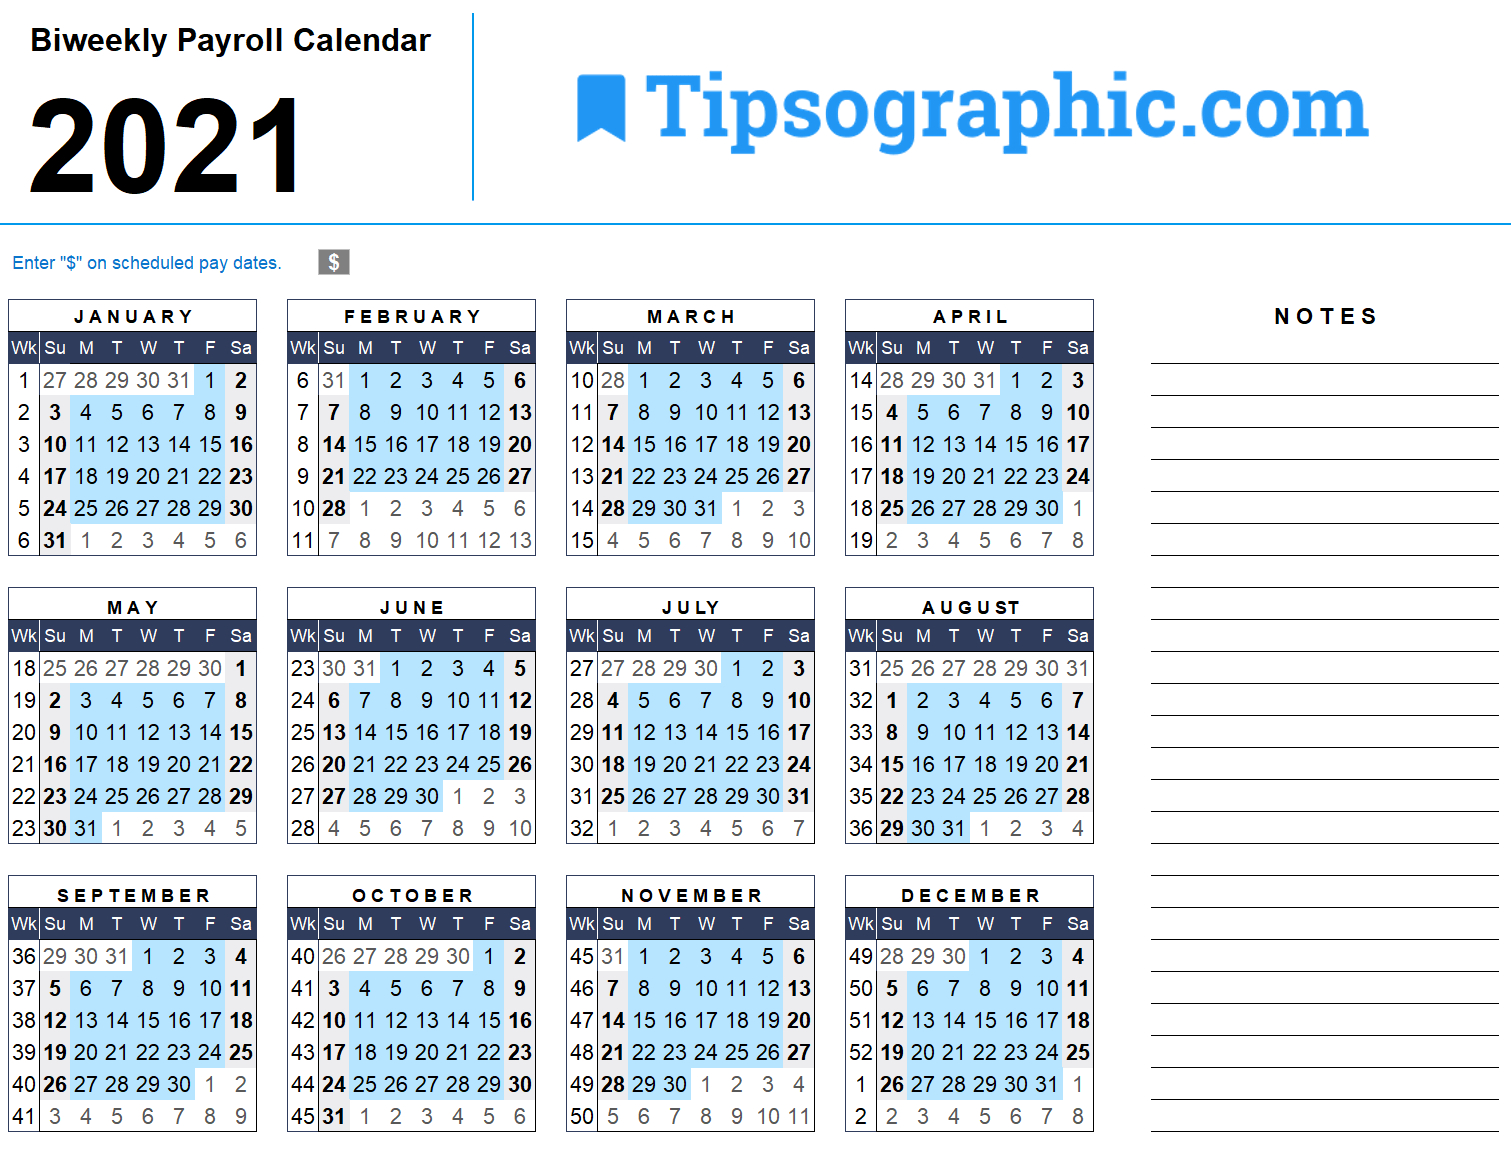 Download The 2021 Biweekly Payroll Calendar | Tipsographic-2021 Employee Vacation Calendar Tracking